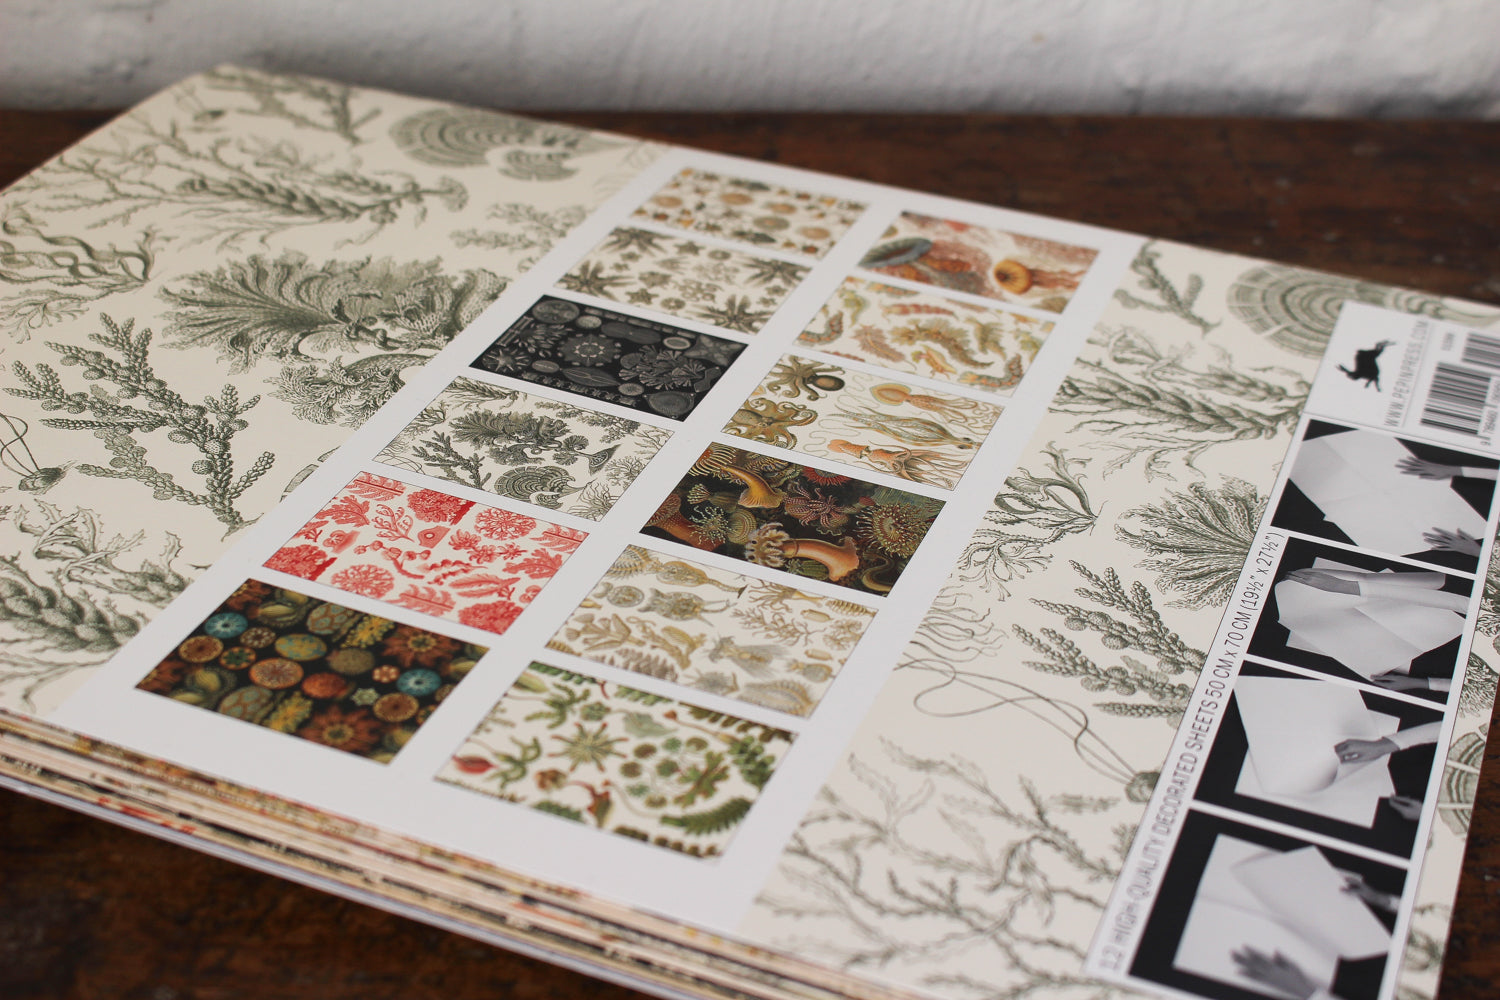 Pepin Press Gift & Creative Papers Book - Art Forms In Nature | Flywheel | Stationery | Tasmania